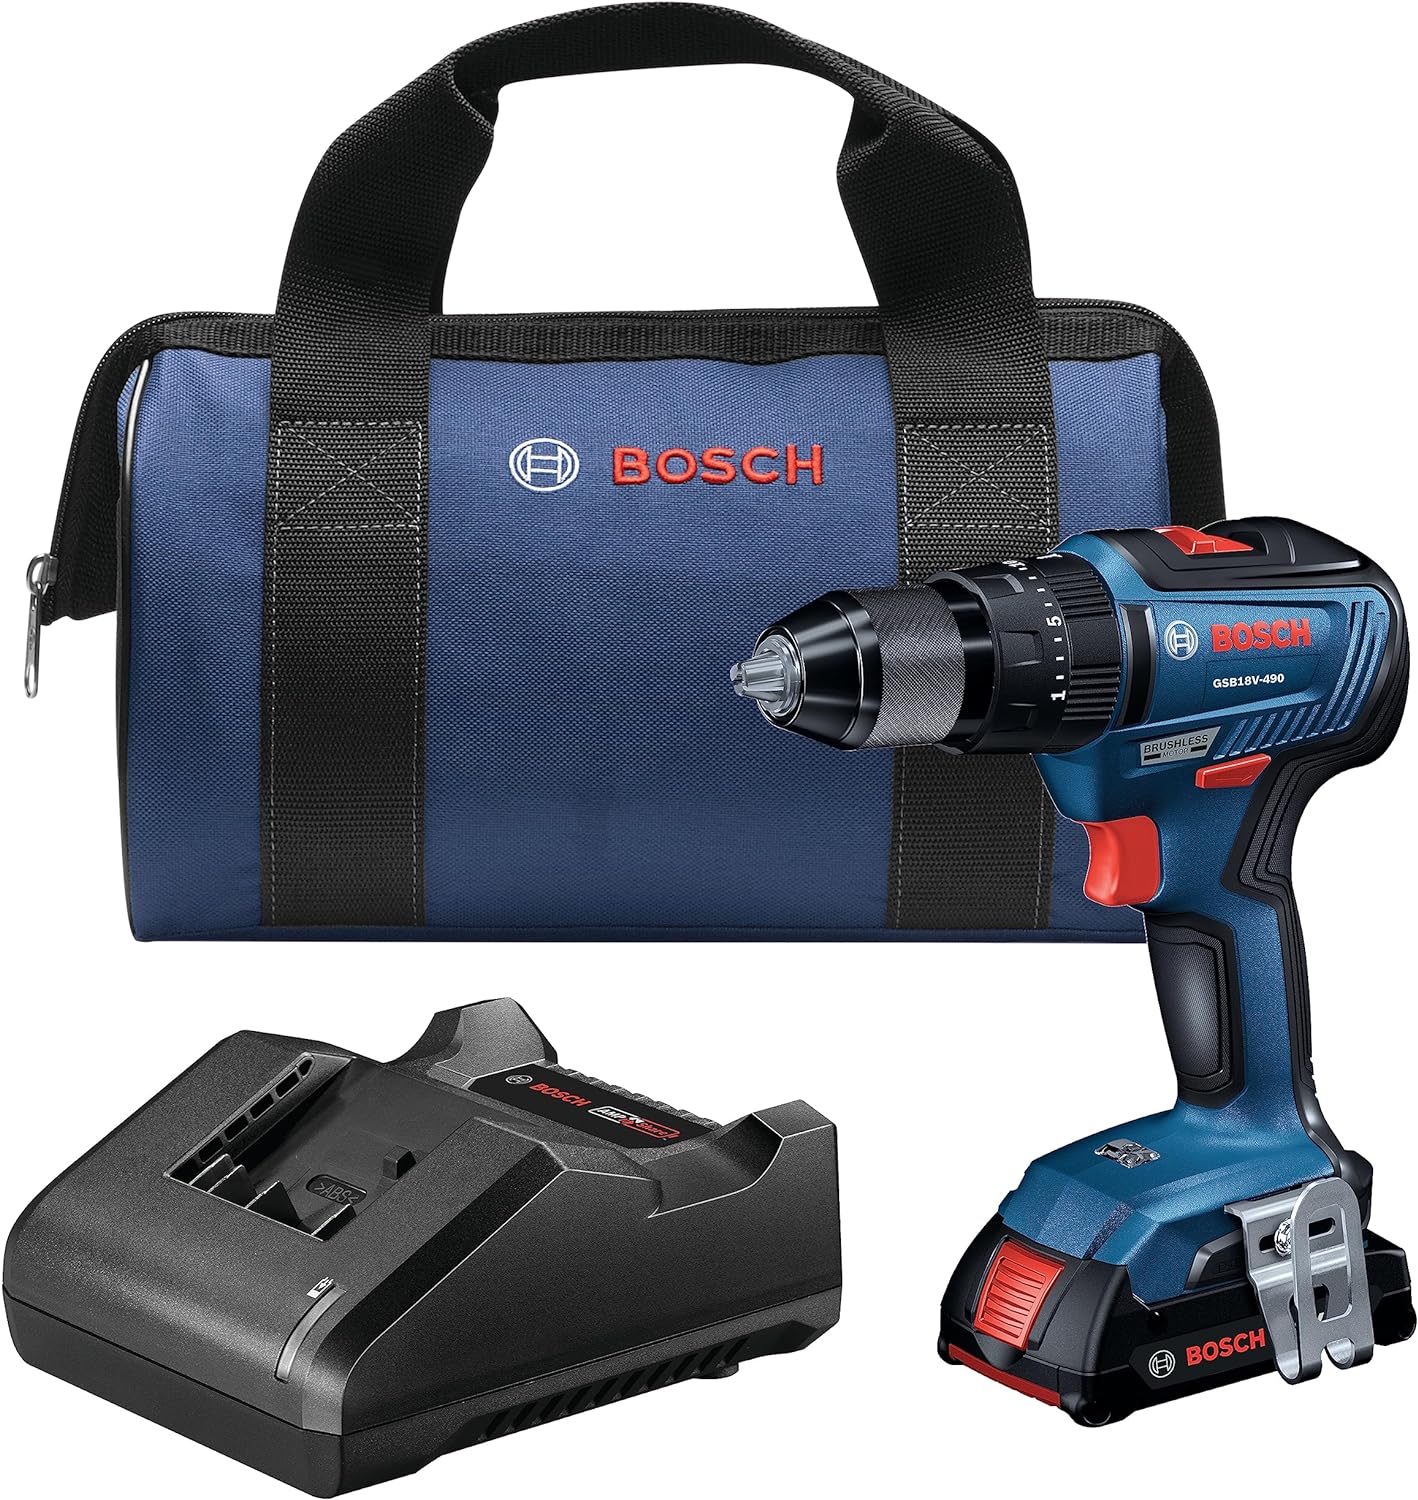 18-Volt 1/2" BOSCH Brushless Hammer Drill/Driver Kit w/ 2Ah SlimPack Battery & Charger $79 + Free Shipping